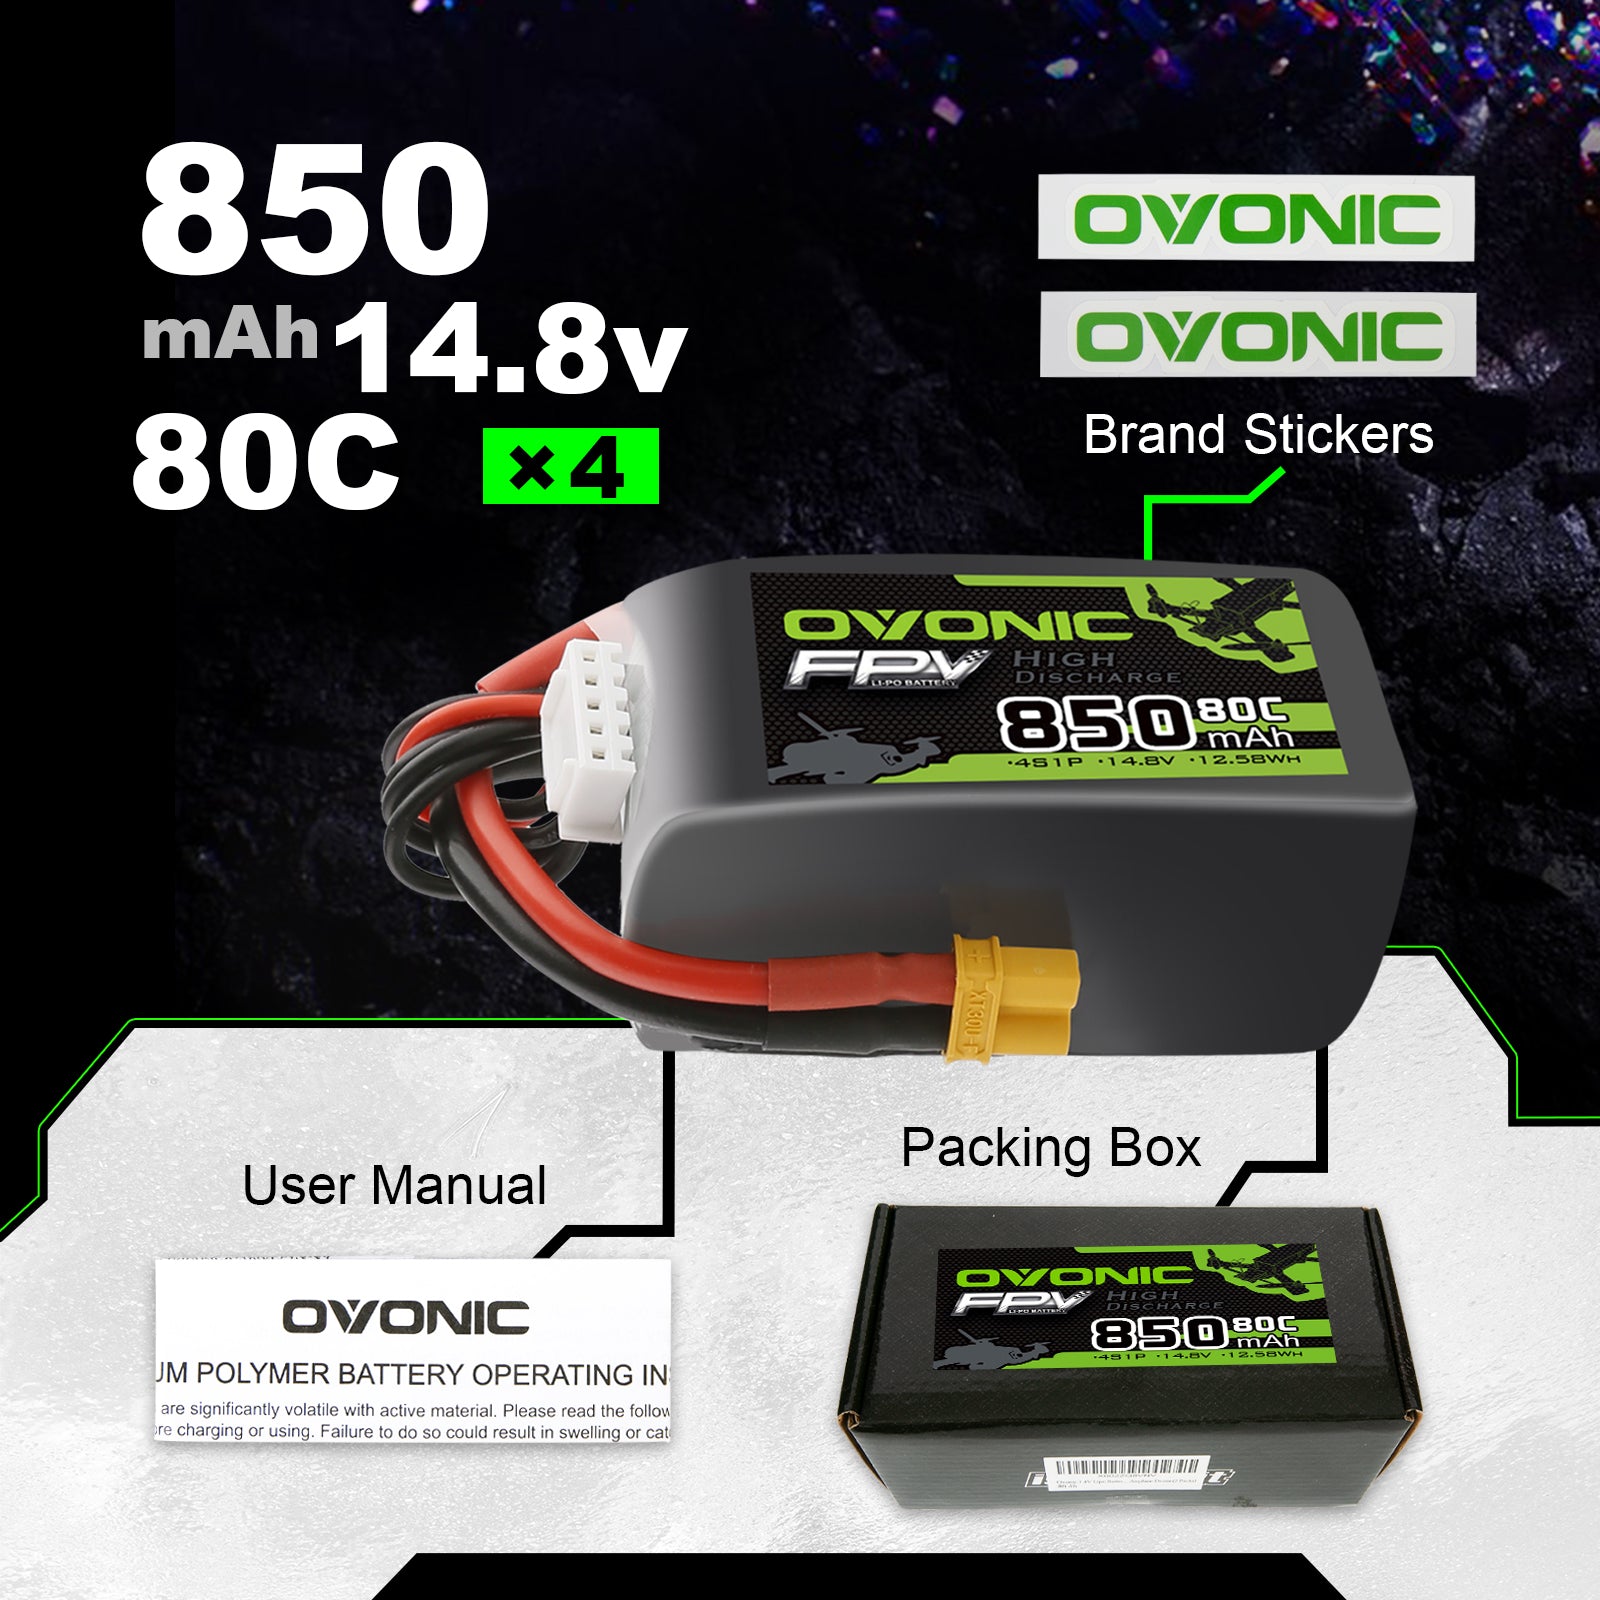 4×Ovonic 80C 4S 850mAh Lipo Battery 14.8V with XT30 Plug for Cinewhoops